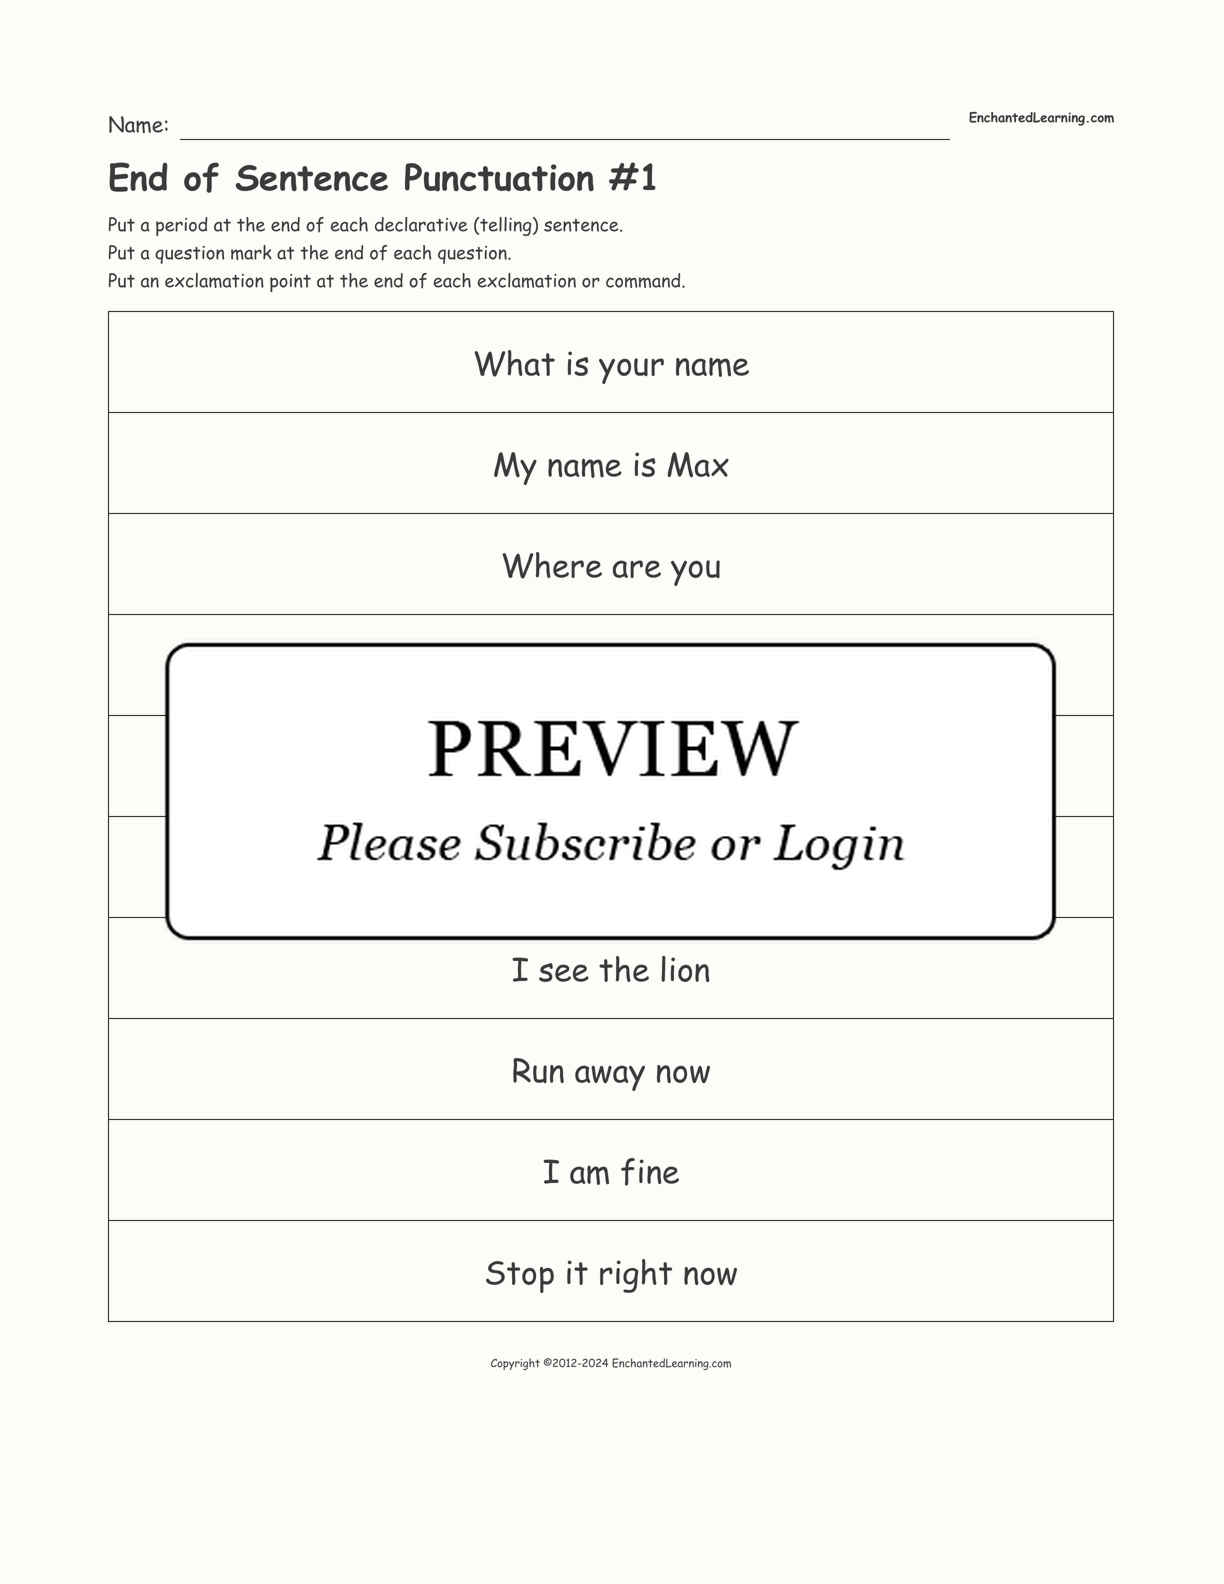 End of Sentence Punctuation #1 interactive worksheet page 1